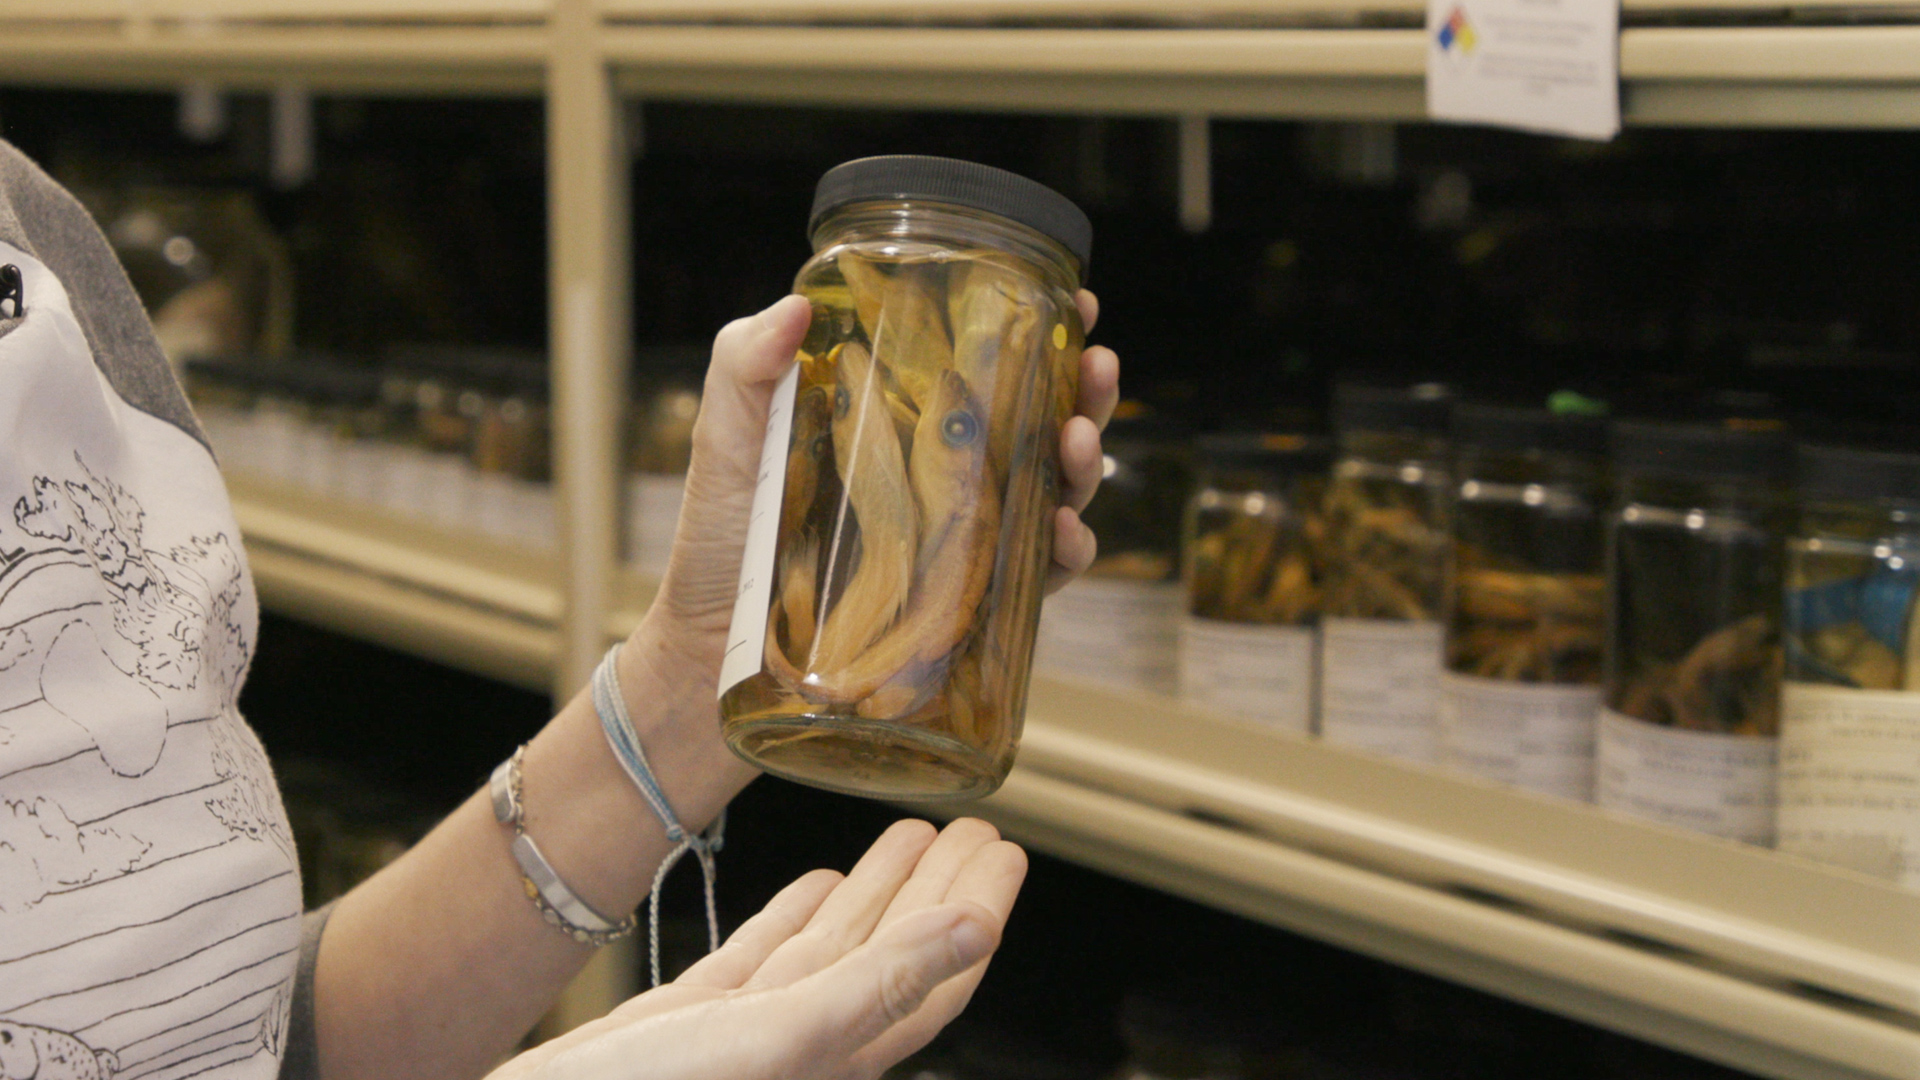 A person holds a large glass jar full of preserved fish in front of a row of similar jars